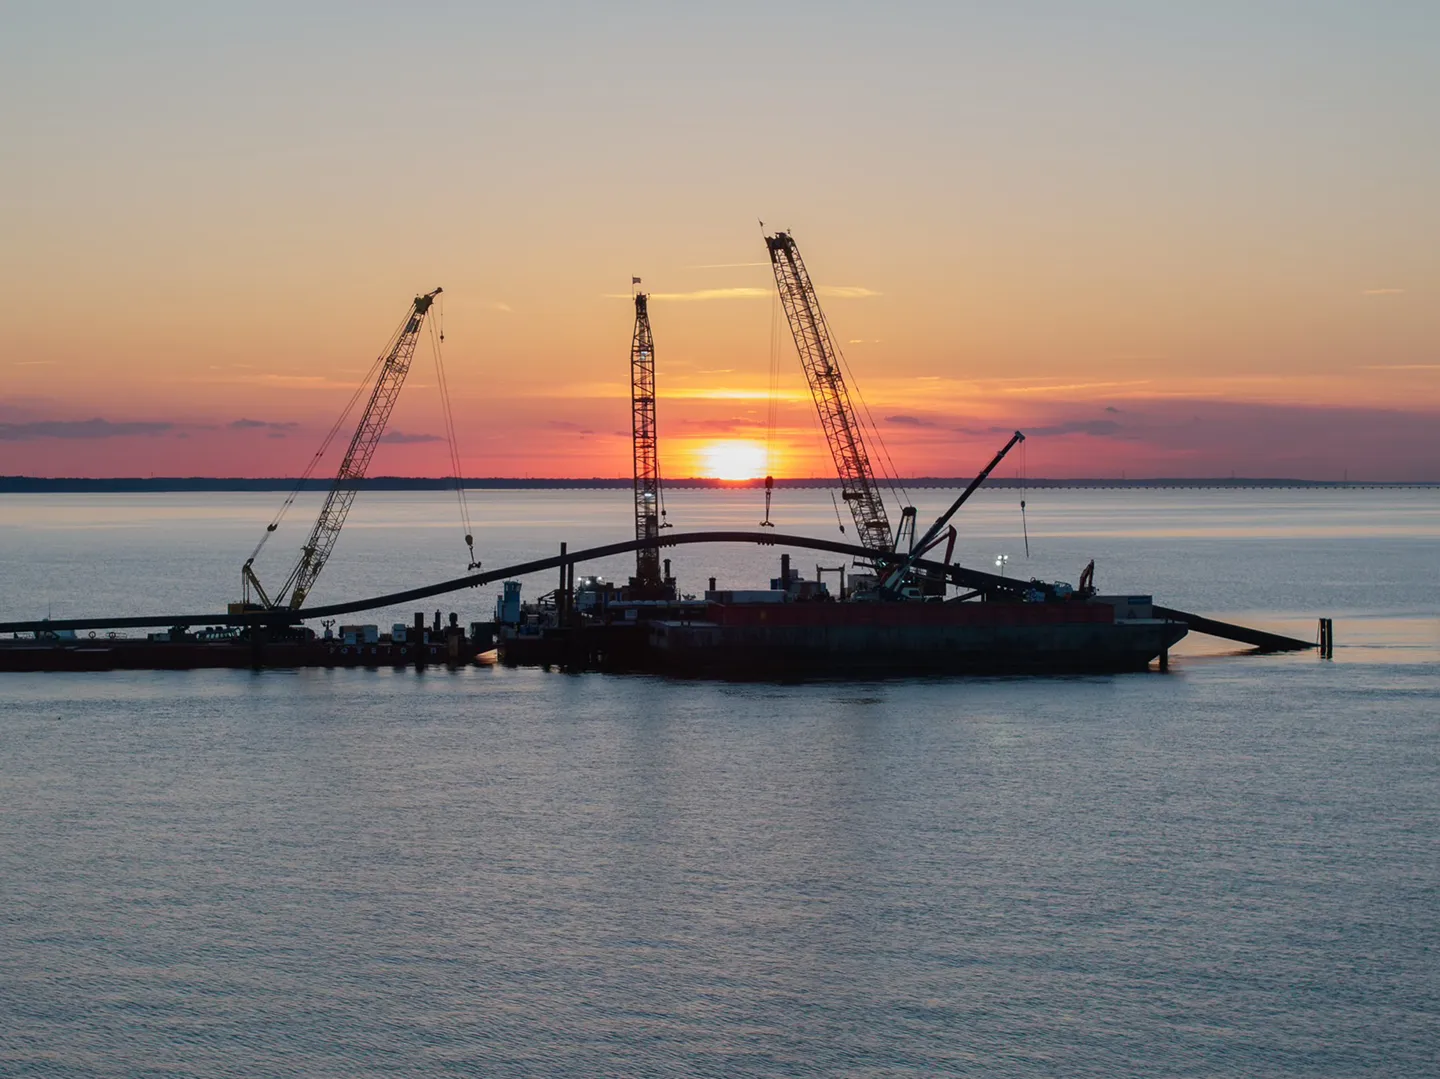 View of shipping channel in Newport News, Virginia. Photo courtesy of Garney Construction.